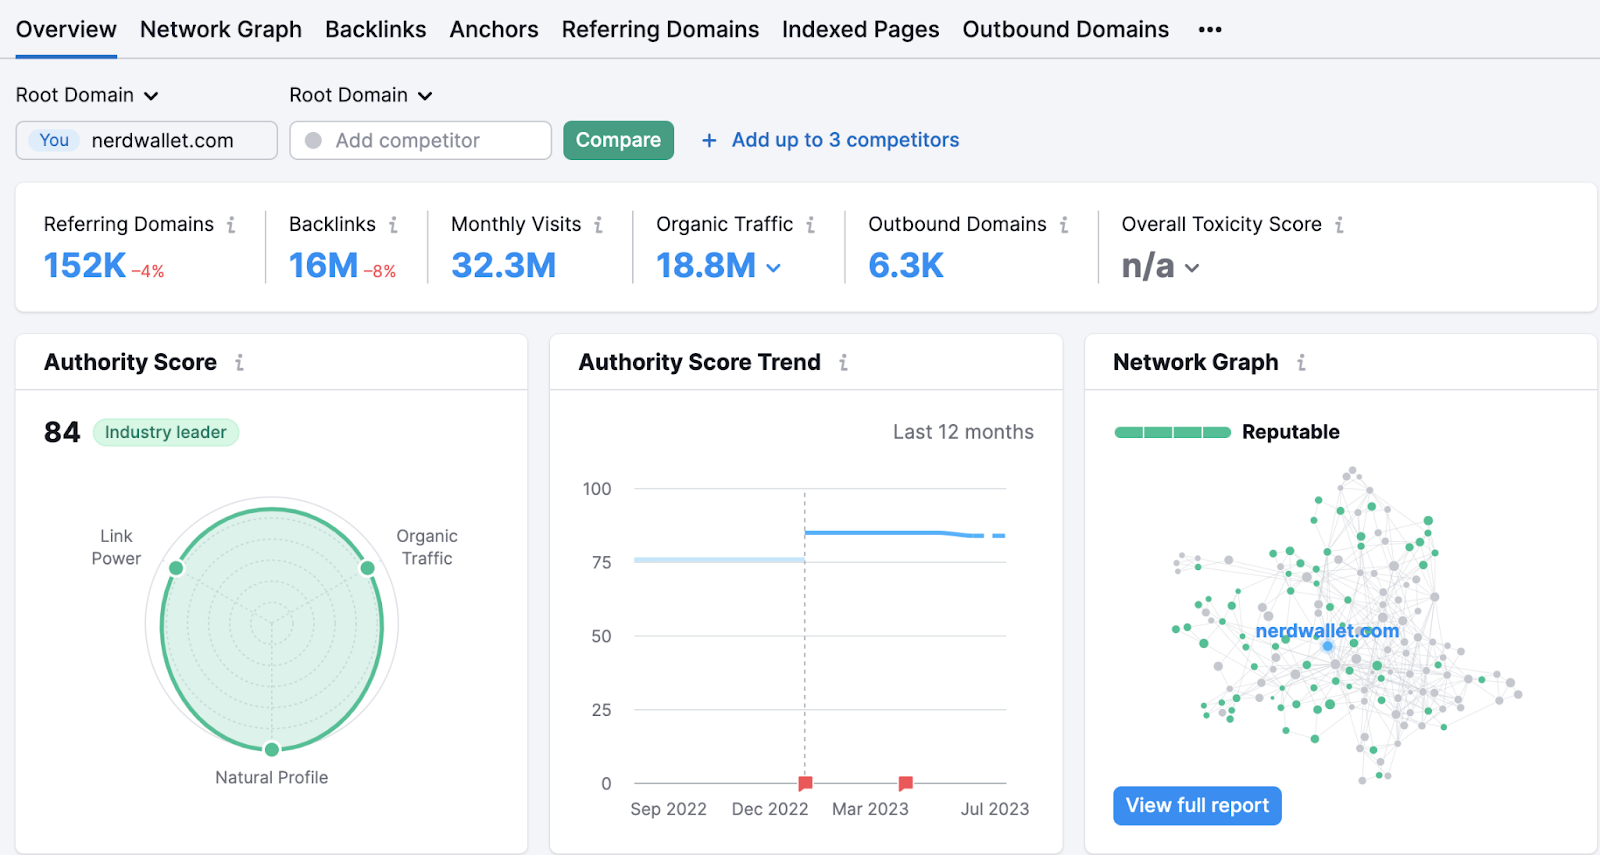 "Overview" dashboard in Backlink Analytics tool